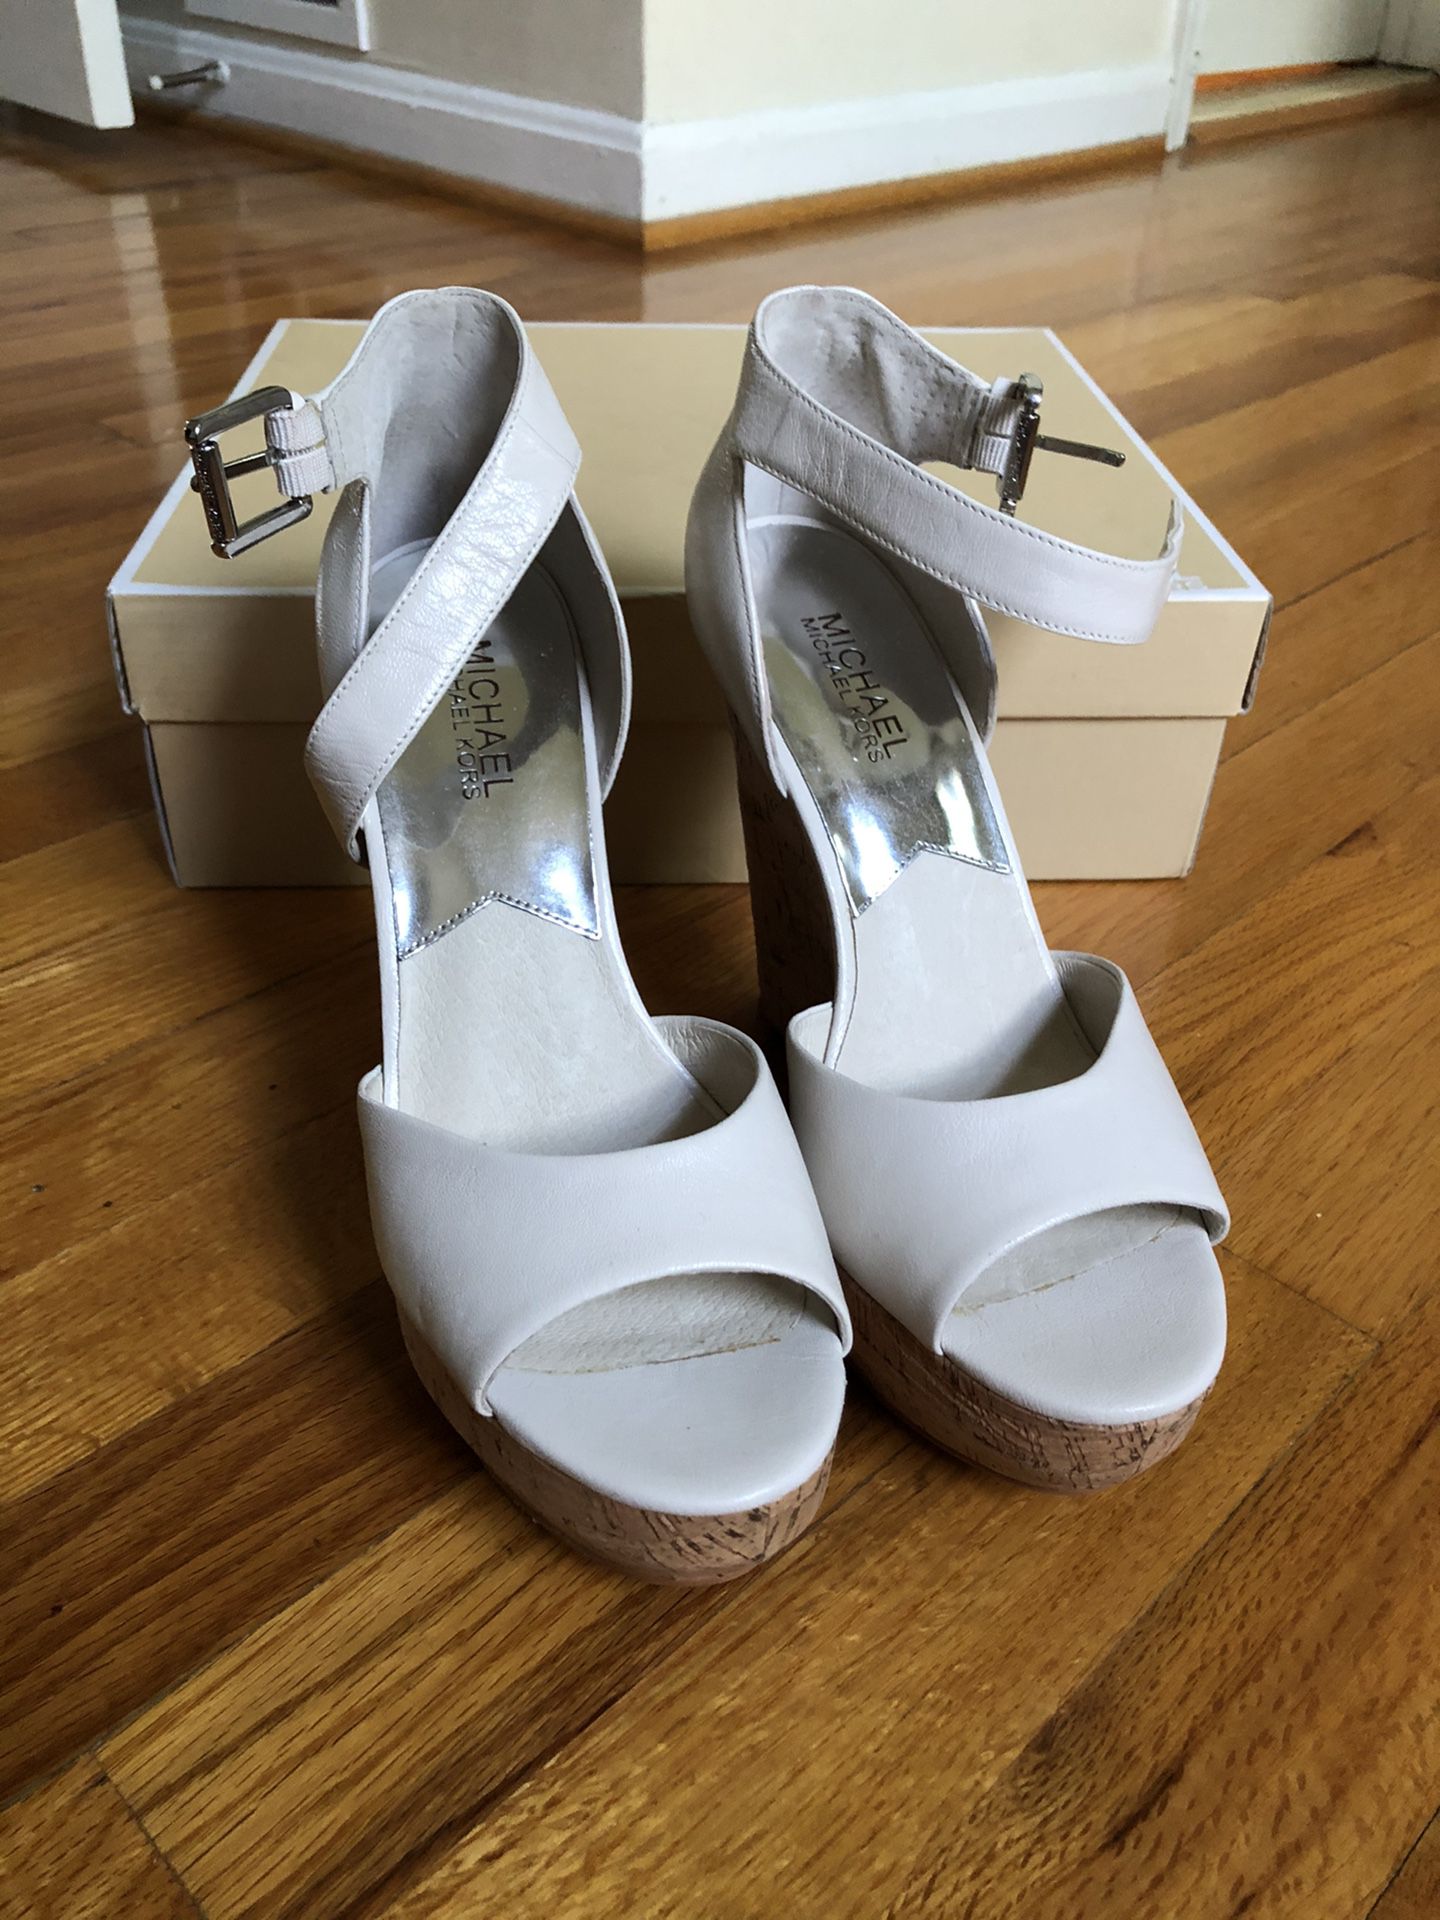 Michael Kors off white wedges size 8